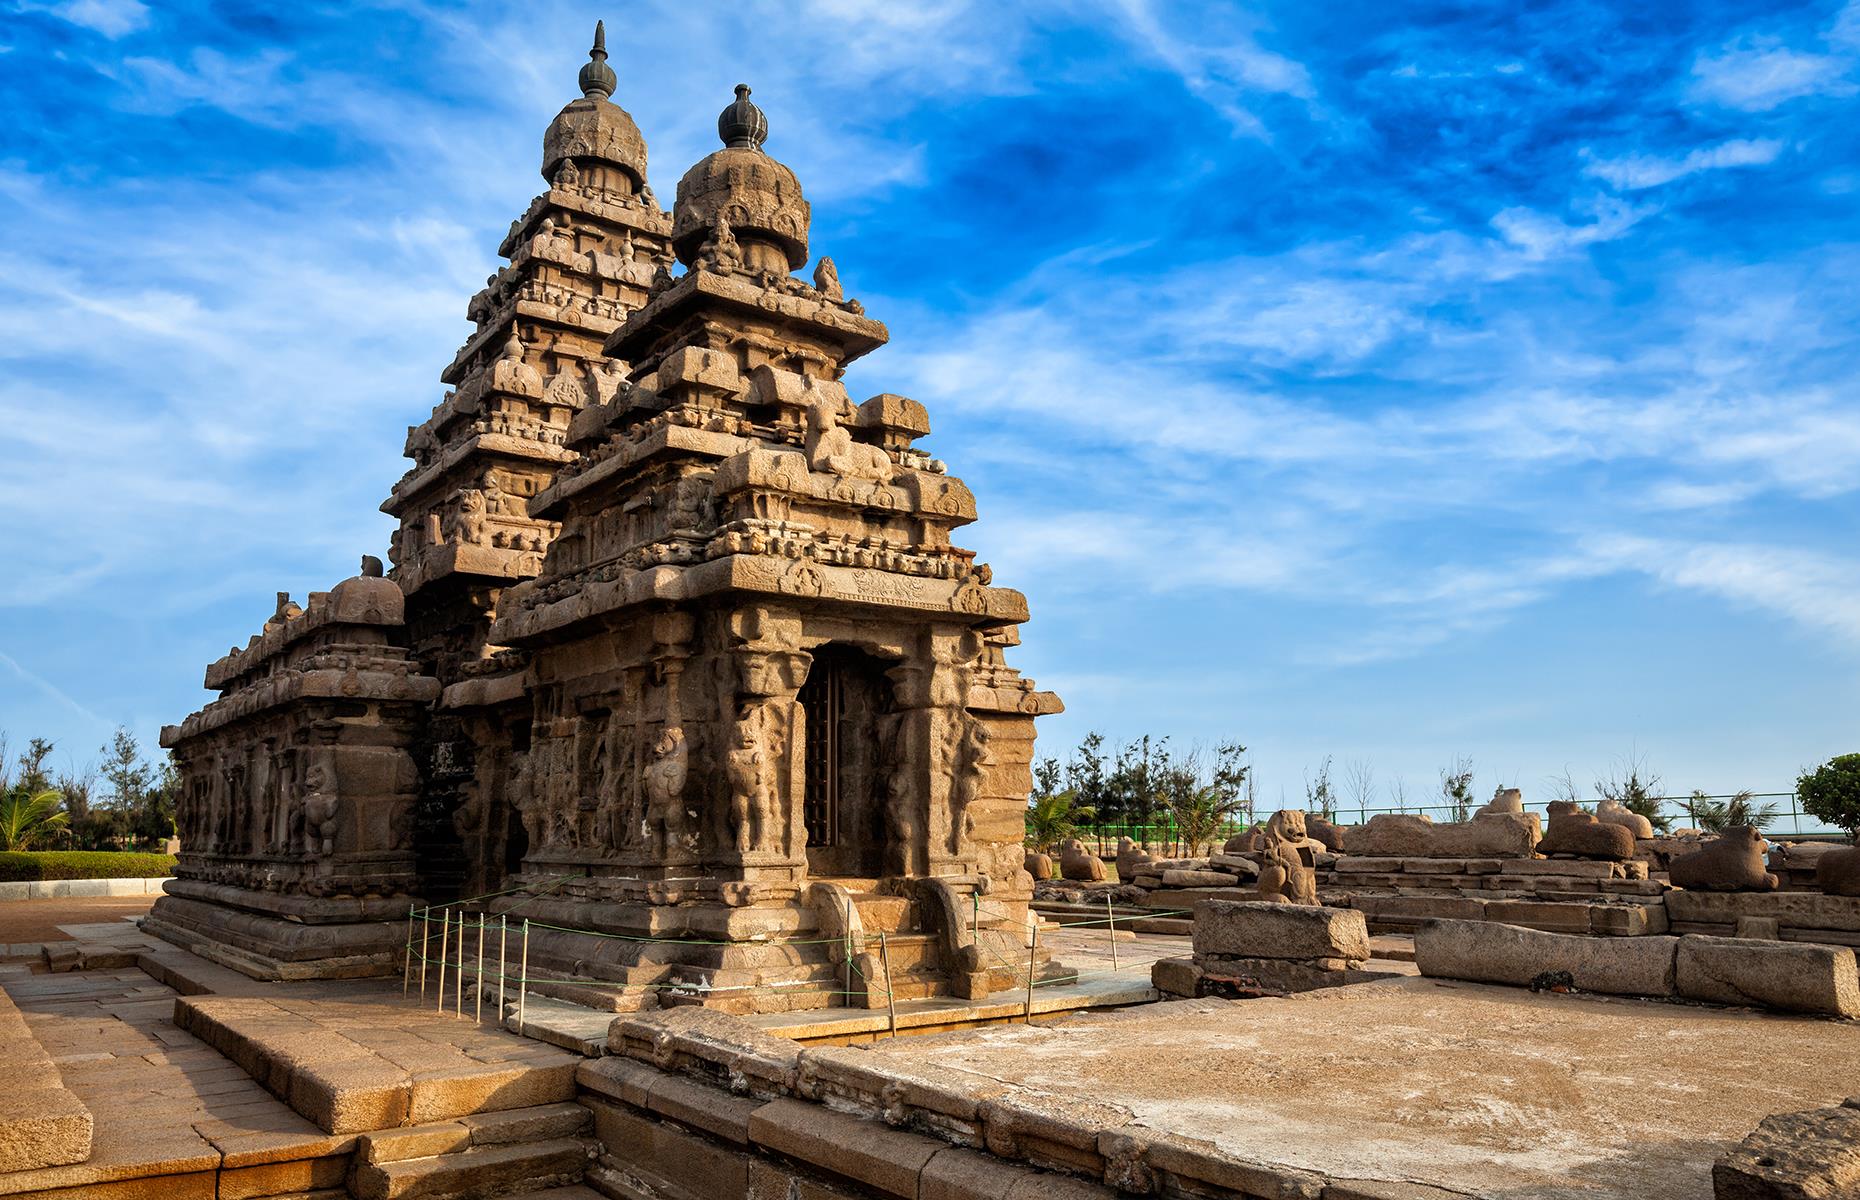 <p>Wander around the evocative temple ruins and carved caves of this port city on Tamil Nadu's Coromandel Coast. The majestic 7th-century Shore Temple (pictured) faces out to the Bay of Bengal and the Pancha Rathas are a complex of rock-cut shrines and intriguing stone monuments, including an elephant.</p>